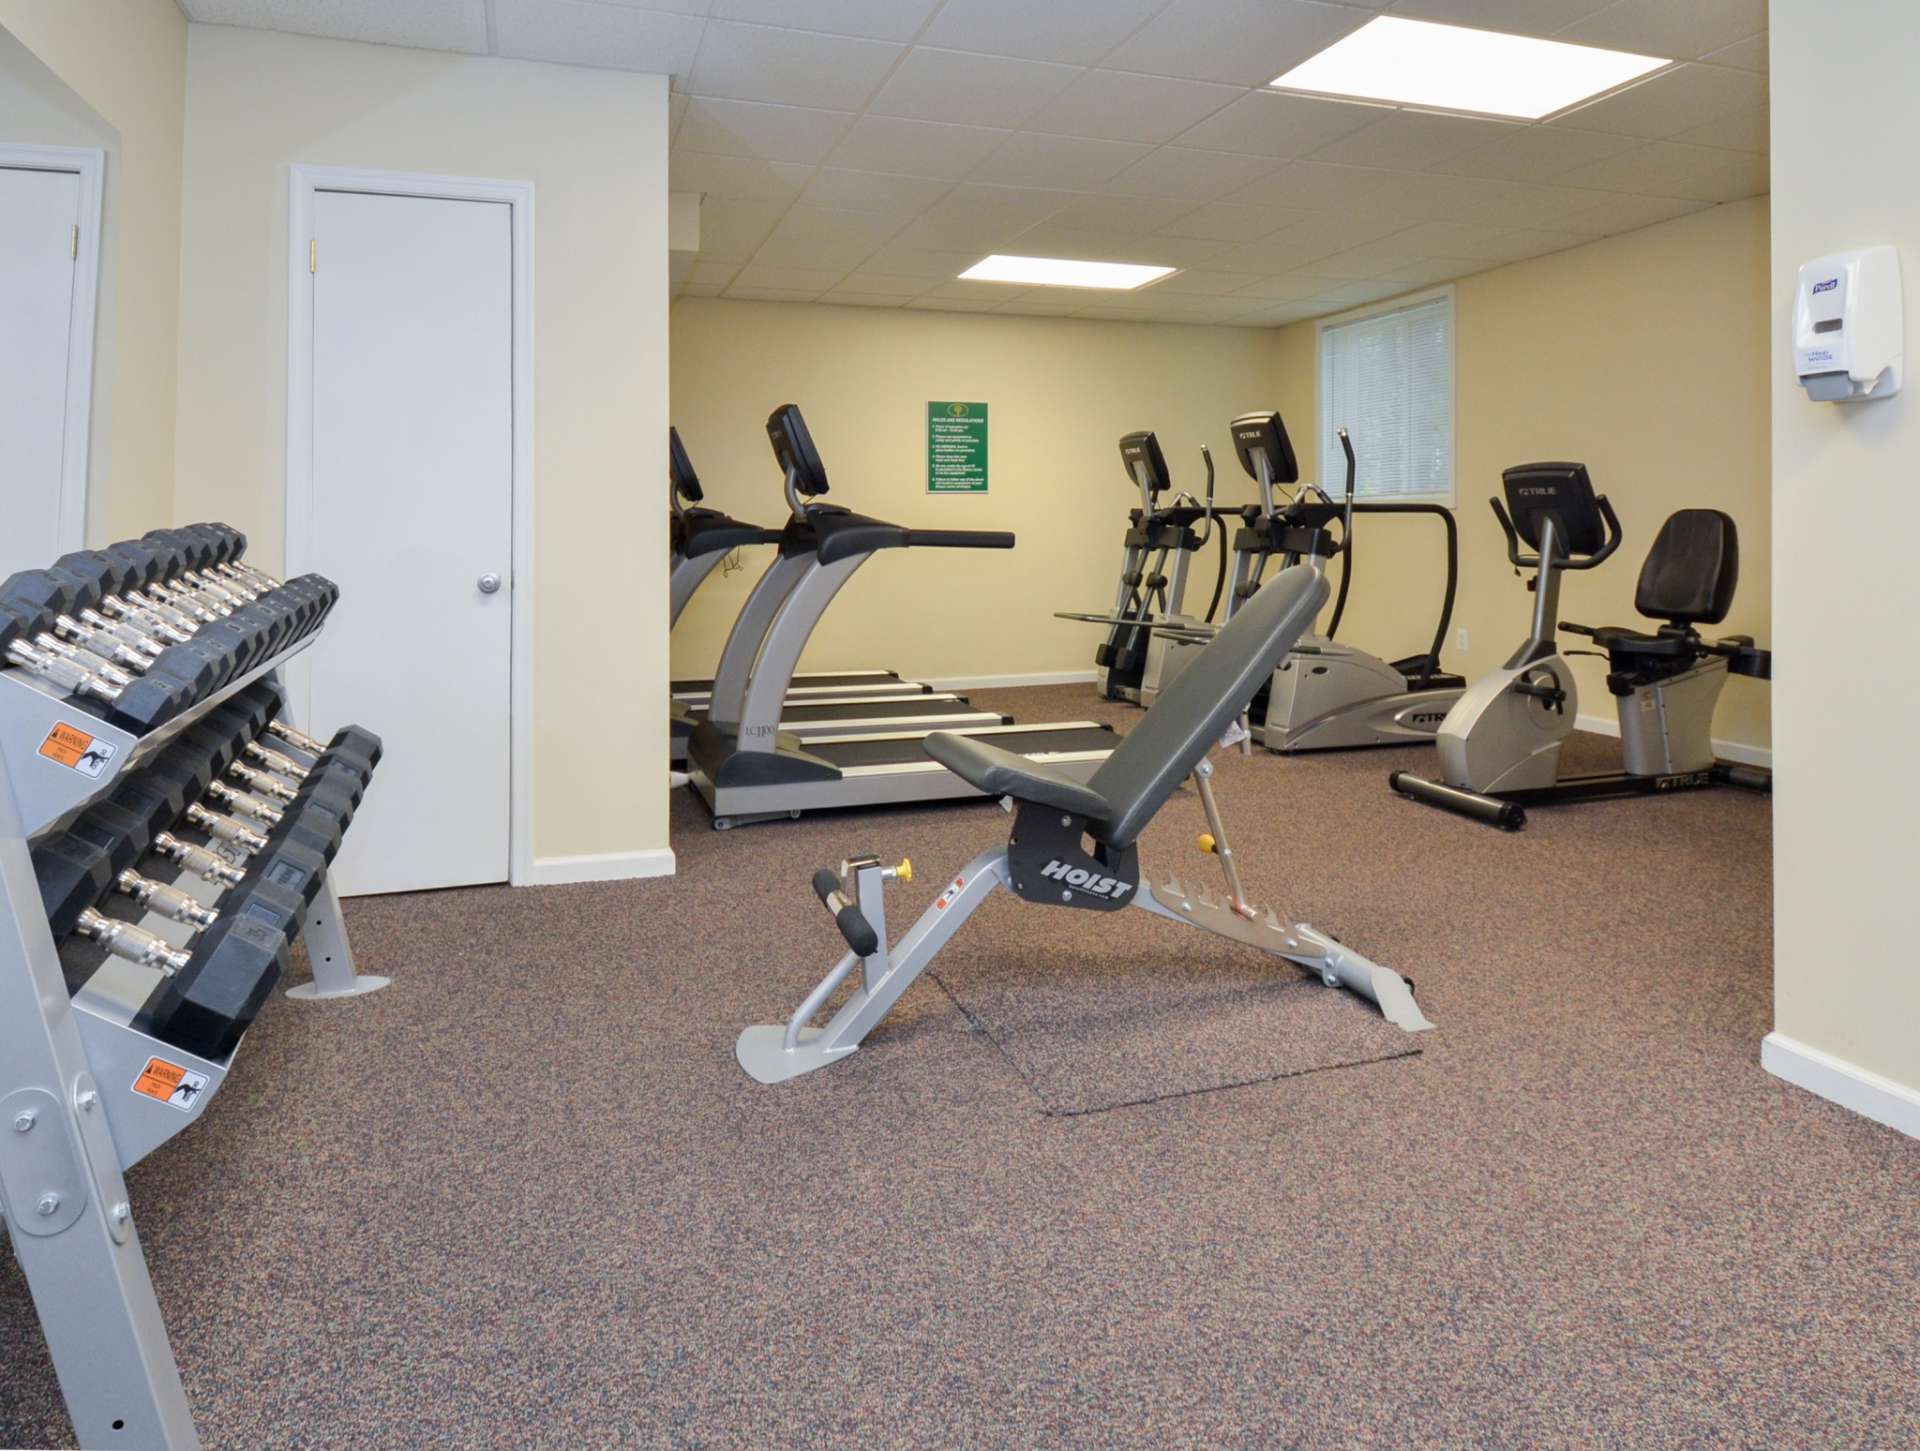 Indoor gym with a variety of workout equipment at Lansdowne Towers.